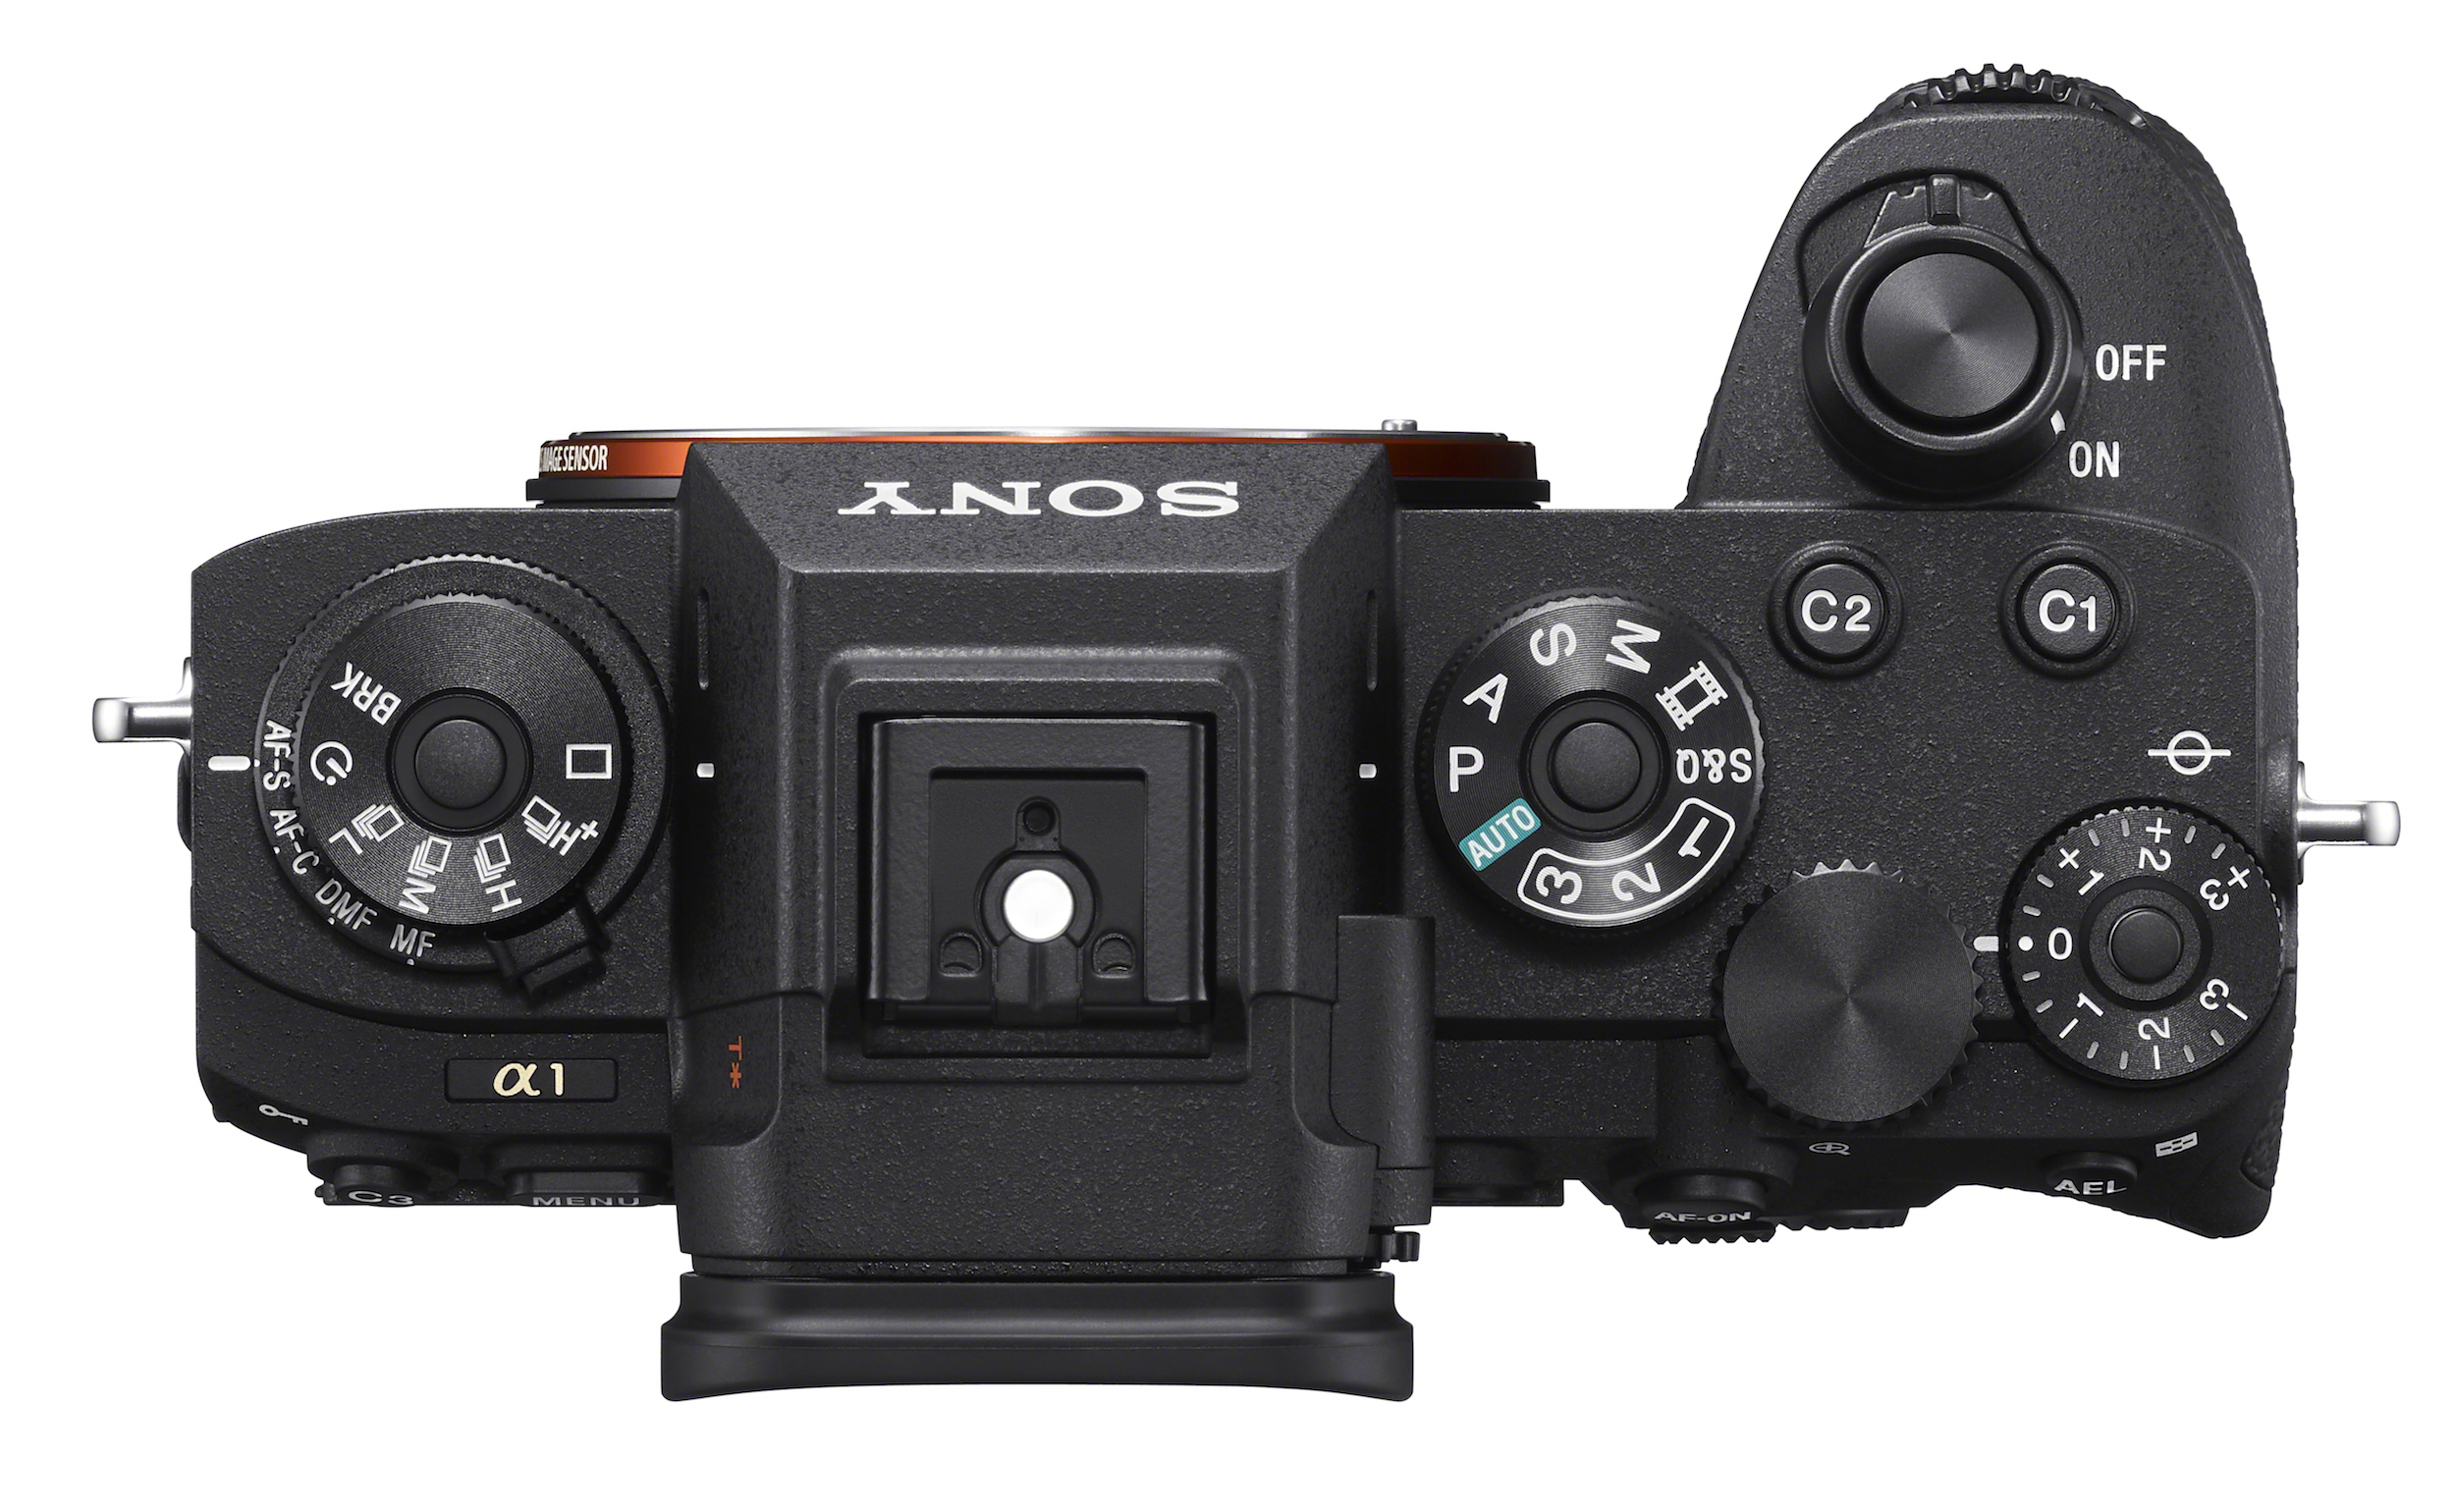 Top view of the Sony Alpha 1 camera showing its controls.